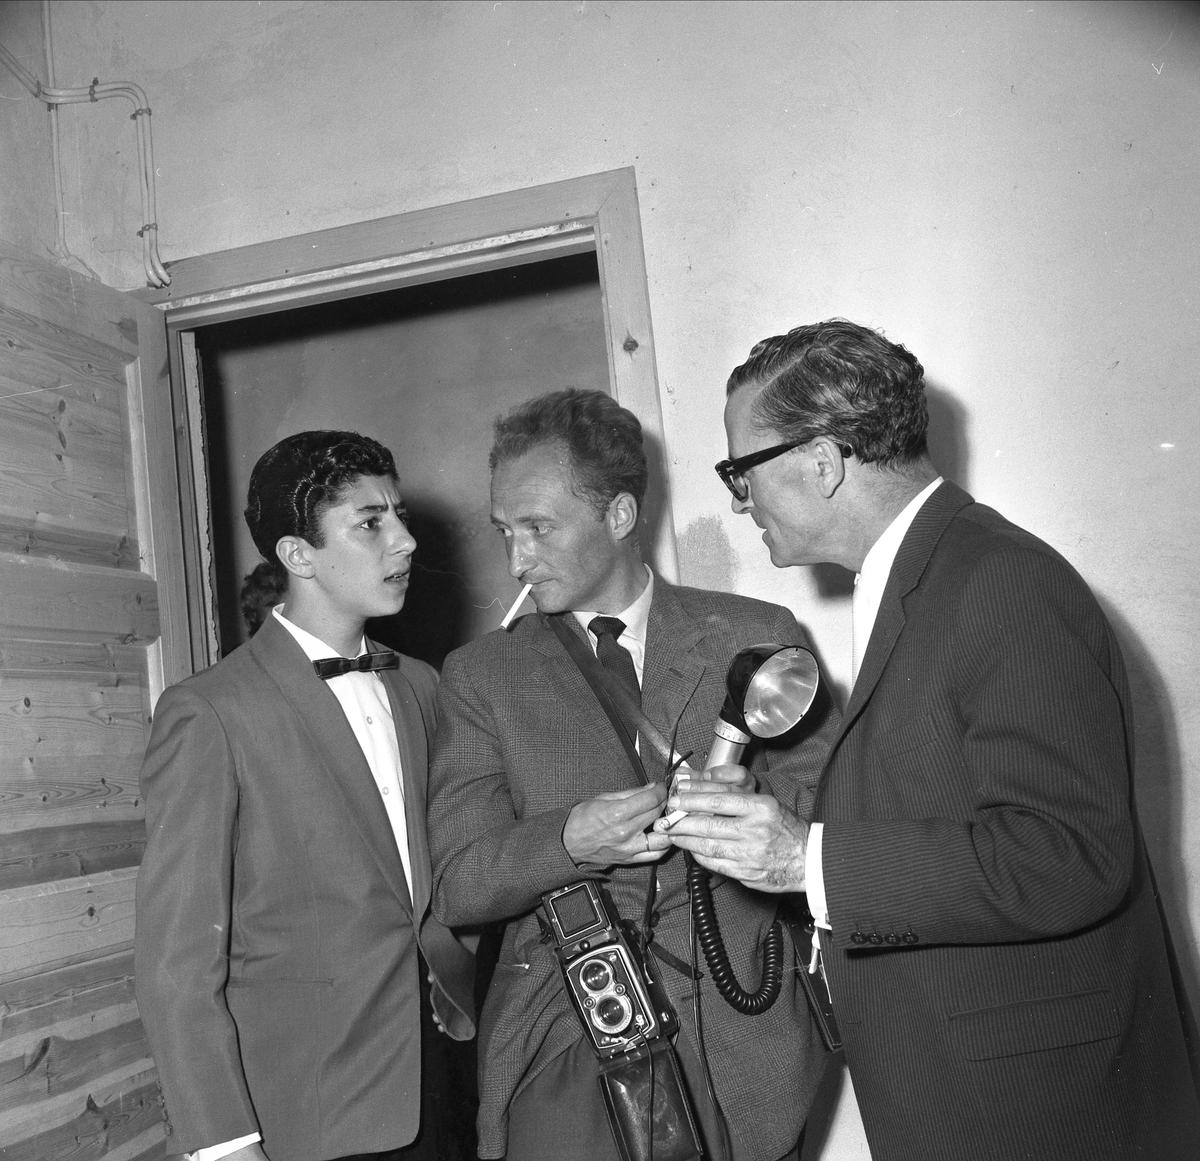 LAURIE LONDON, JOURNALIST/FOTOGRAF ROLF STRANDE FRA HAMAR ARBEIDERBLAD, OG LL MANAGER UKJENT NAVN, KONSERT PÅ DOMKIRKEODDEN. SE BOKA PÅ ET HUNDNREDELS SEKUND, LØTEN OG OMEGN 19571964 I ORD OG BILDERAV HELGE REISTAD S. 173. . Laurie London (born 19 January, 1944, Bethnal Green, East London) achieved fame as a boy singer of the 1950s, recording in both English and German. At the age of thirteen he made an up-tempo version of the spiritual song Hes Got the Whole World in His Hands with the Geoff Love Orchestra for Parlophone Records (45-R4359) which was picked up by its co-owned American sister label Capitol Records (F3891). In April 1958 it reached 